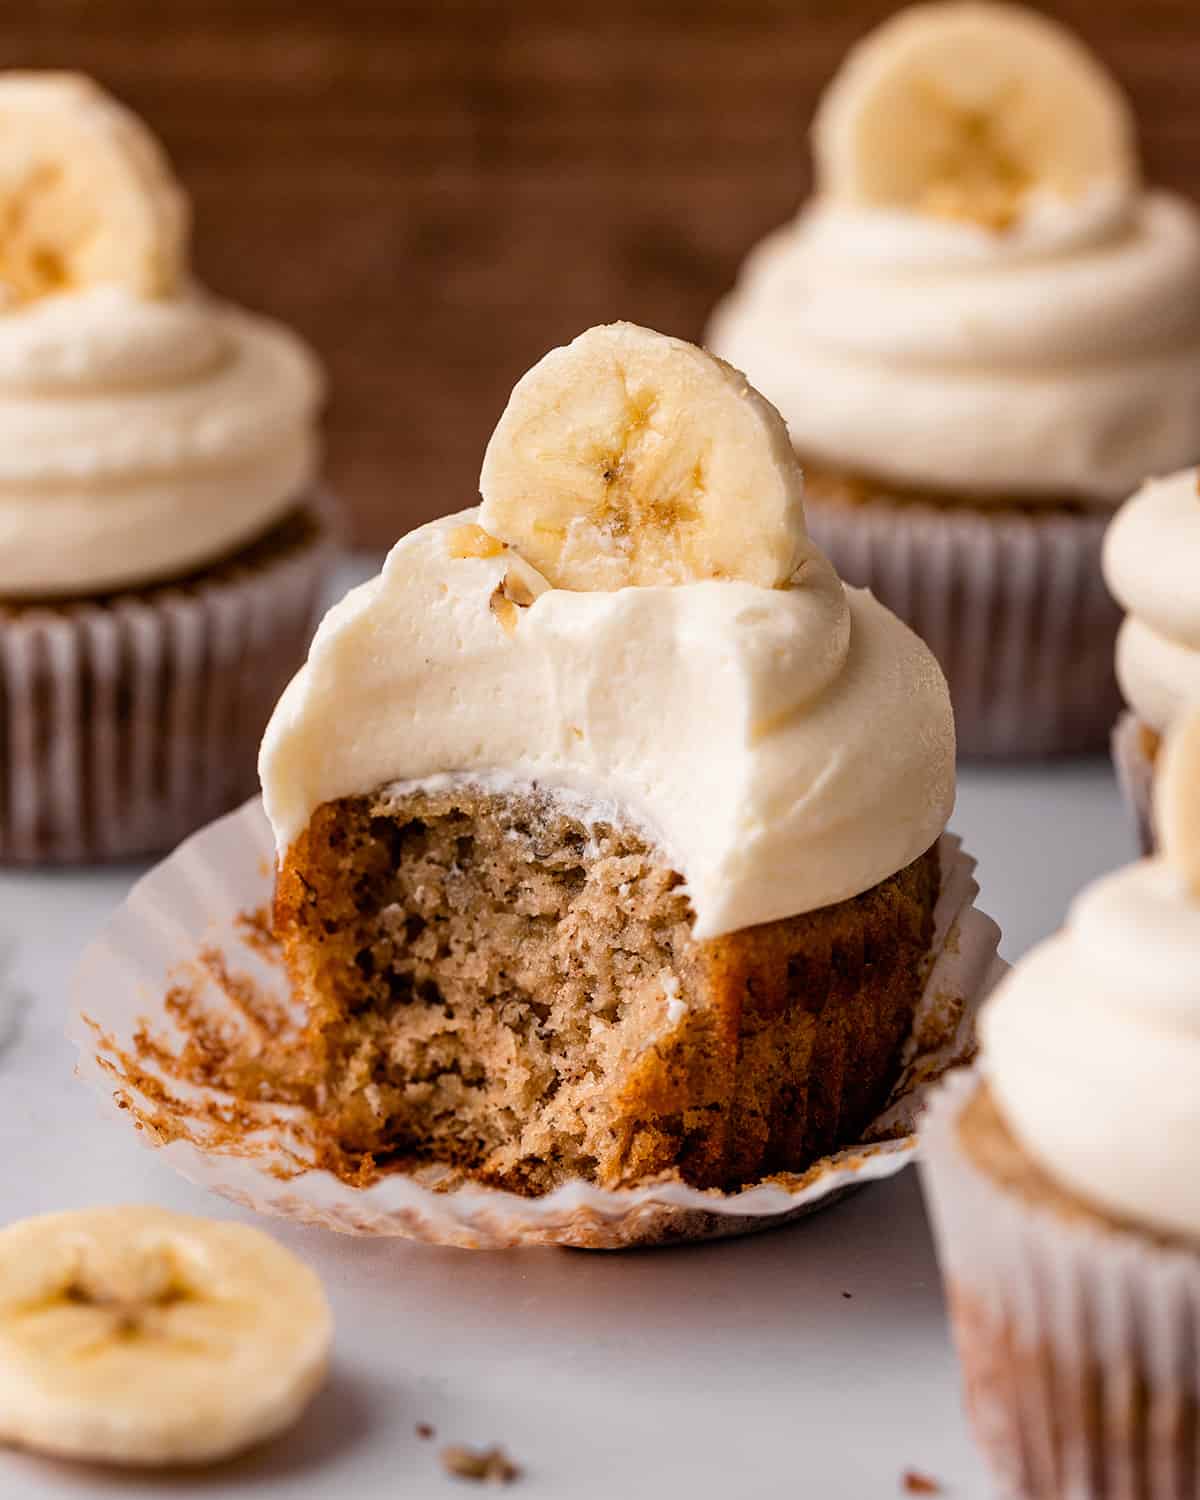 4 Banana Cupcakes with frosting, one with a bite taken out of it